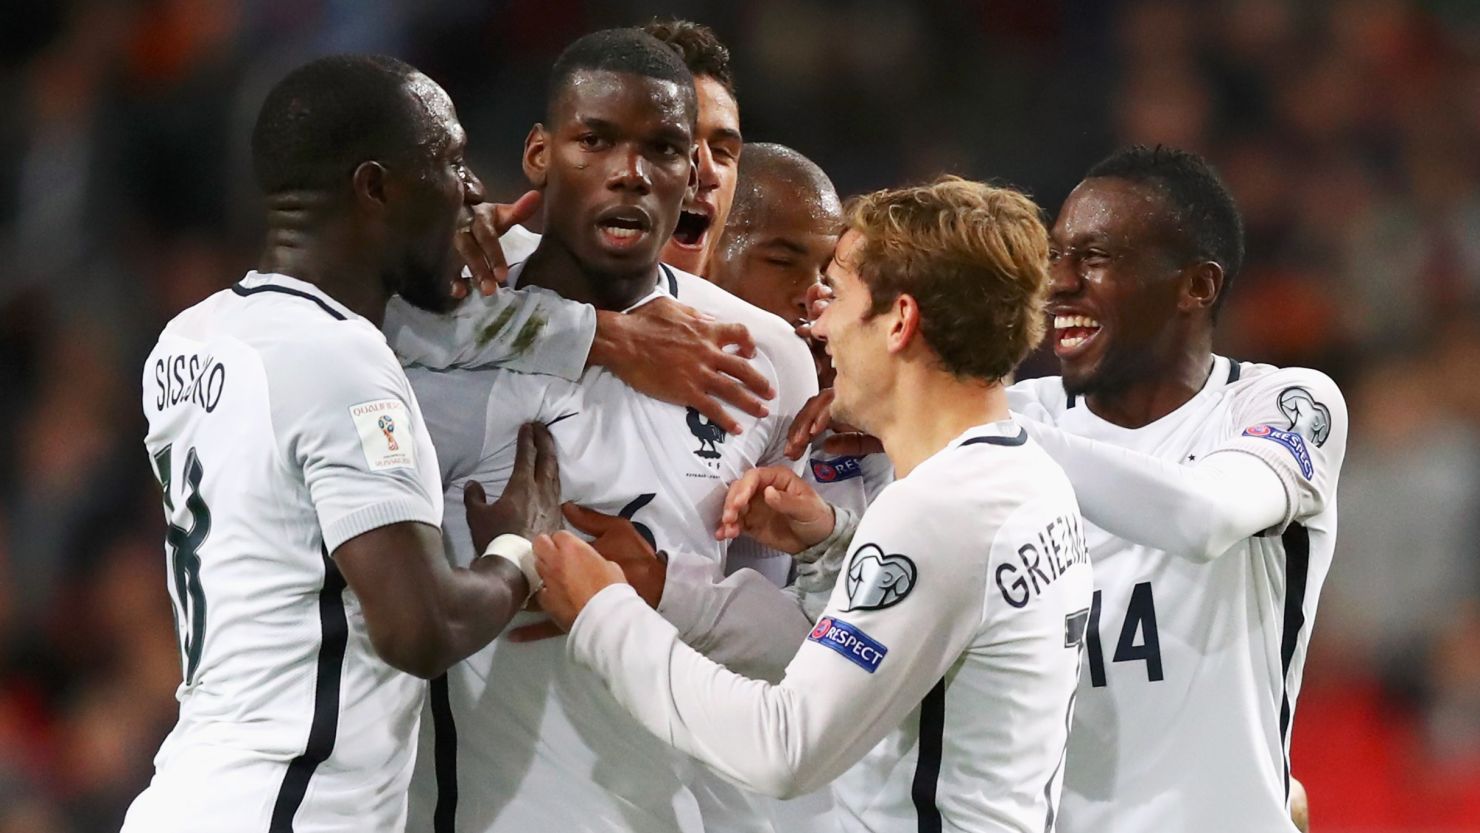 Paul Pogba is mobbed by his teammates after scoring France's winning goal.